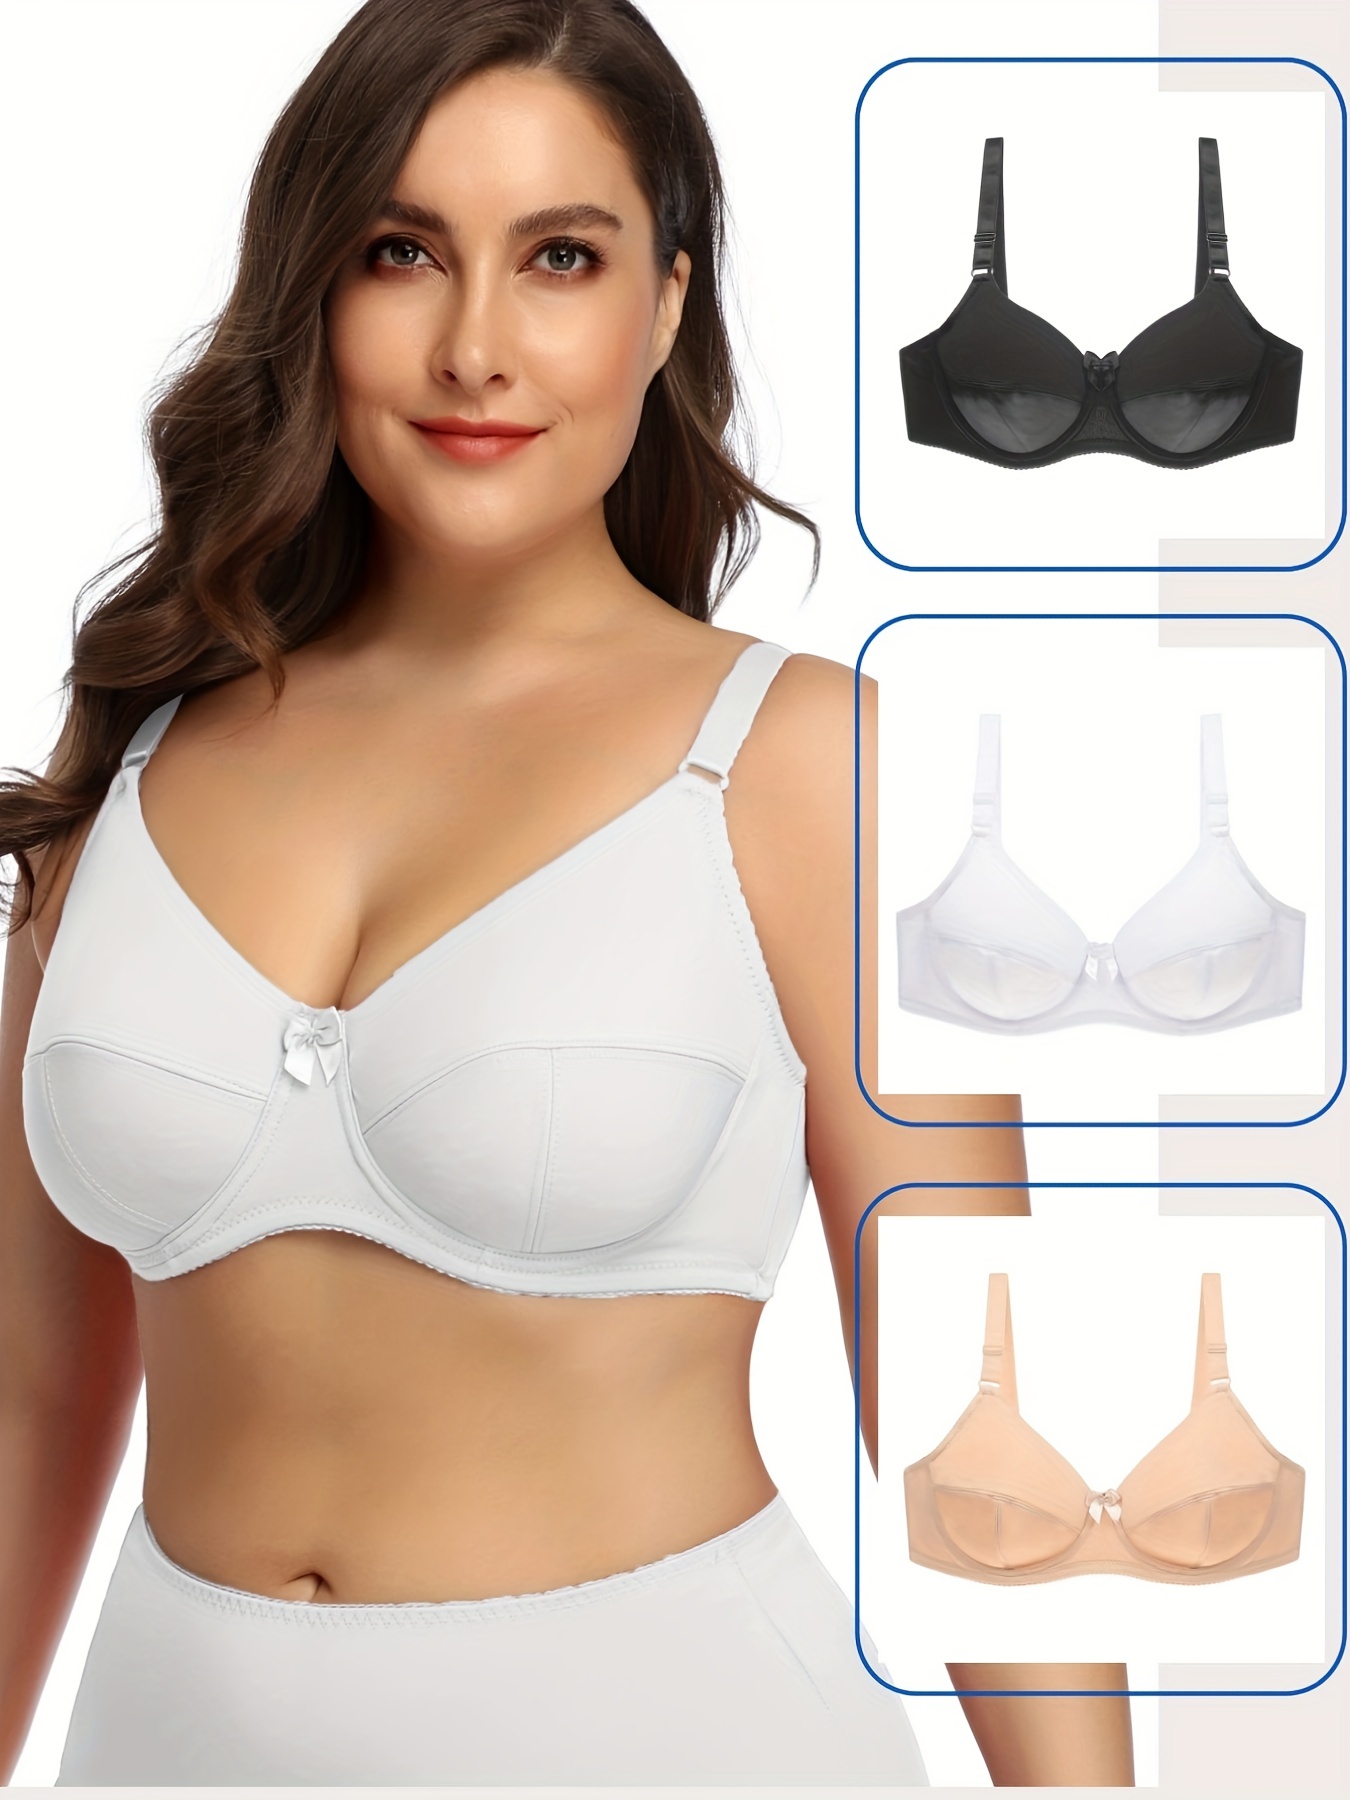 Women's Full Figure Simple Shaping Minimizer Bra with Thin Supportive Padded